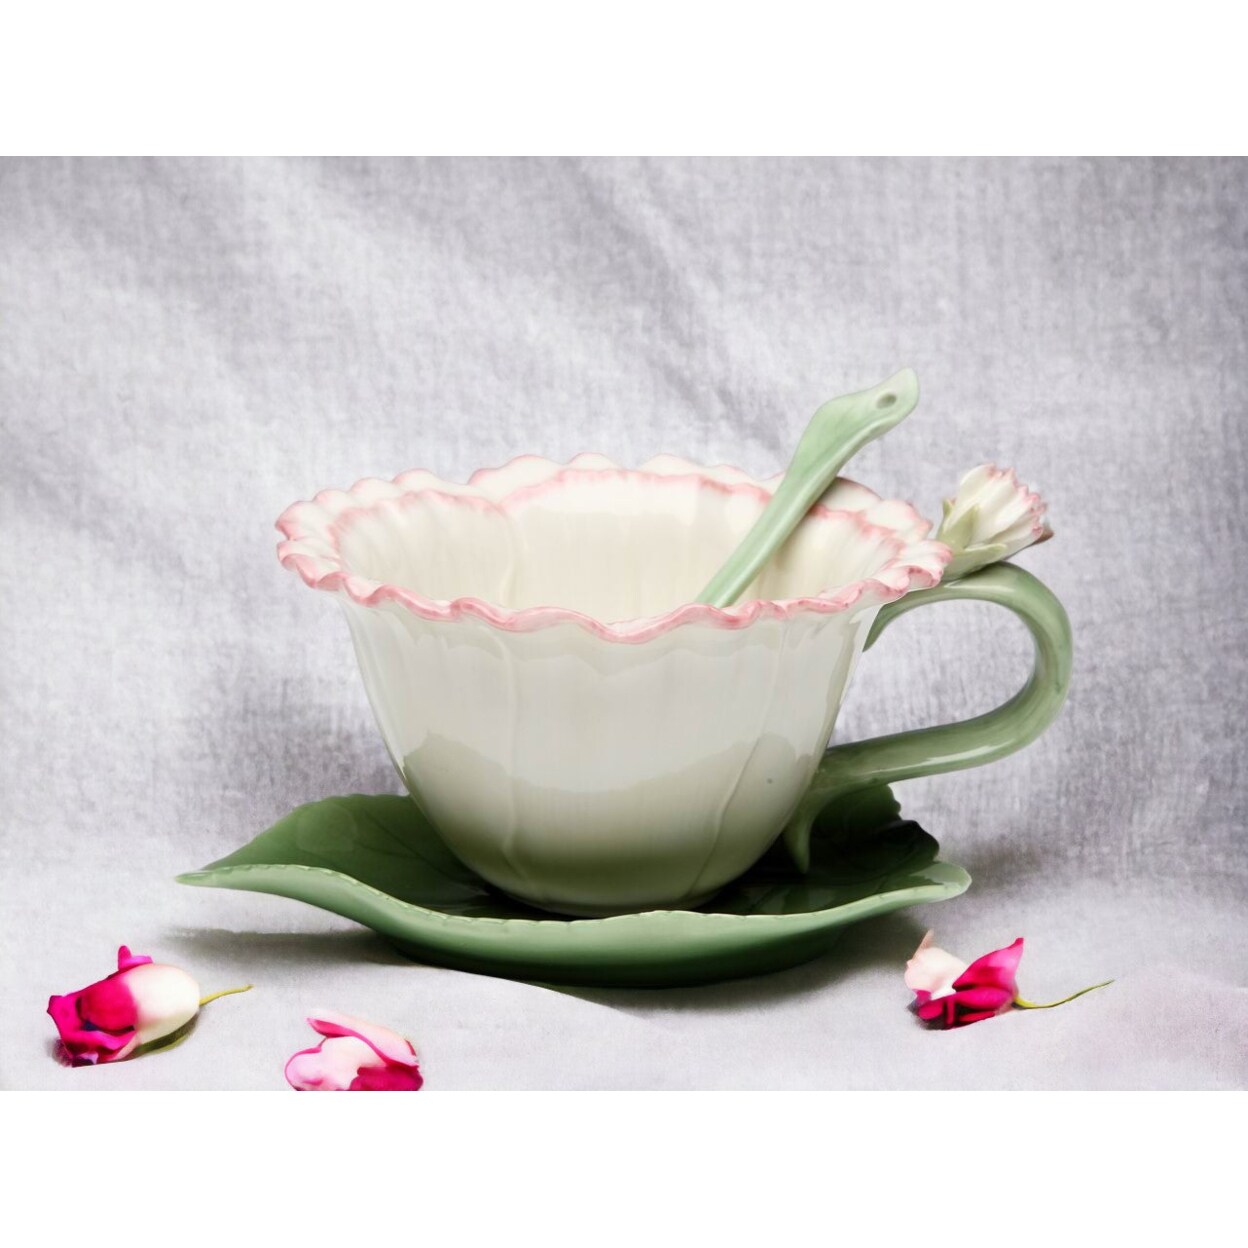 kevinsgiftshoppe Ceramic Carnation Flower Cup and Saucer and Spoon-2 Sets   Tea Party Decor Cafe Decor